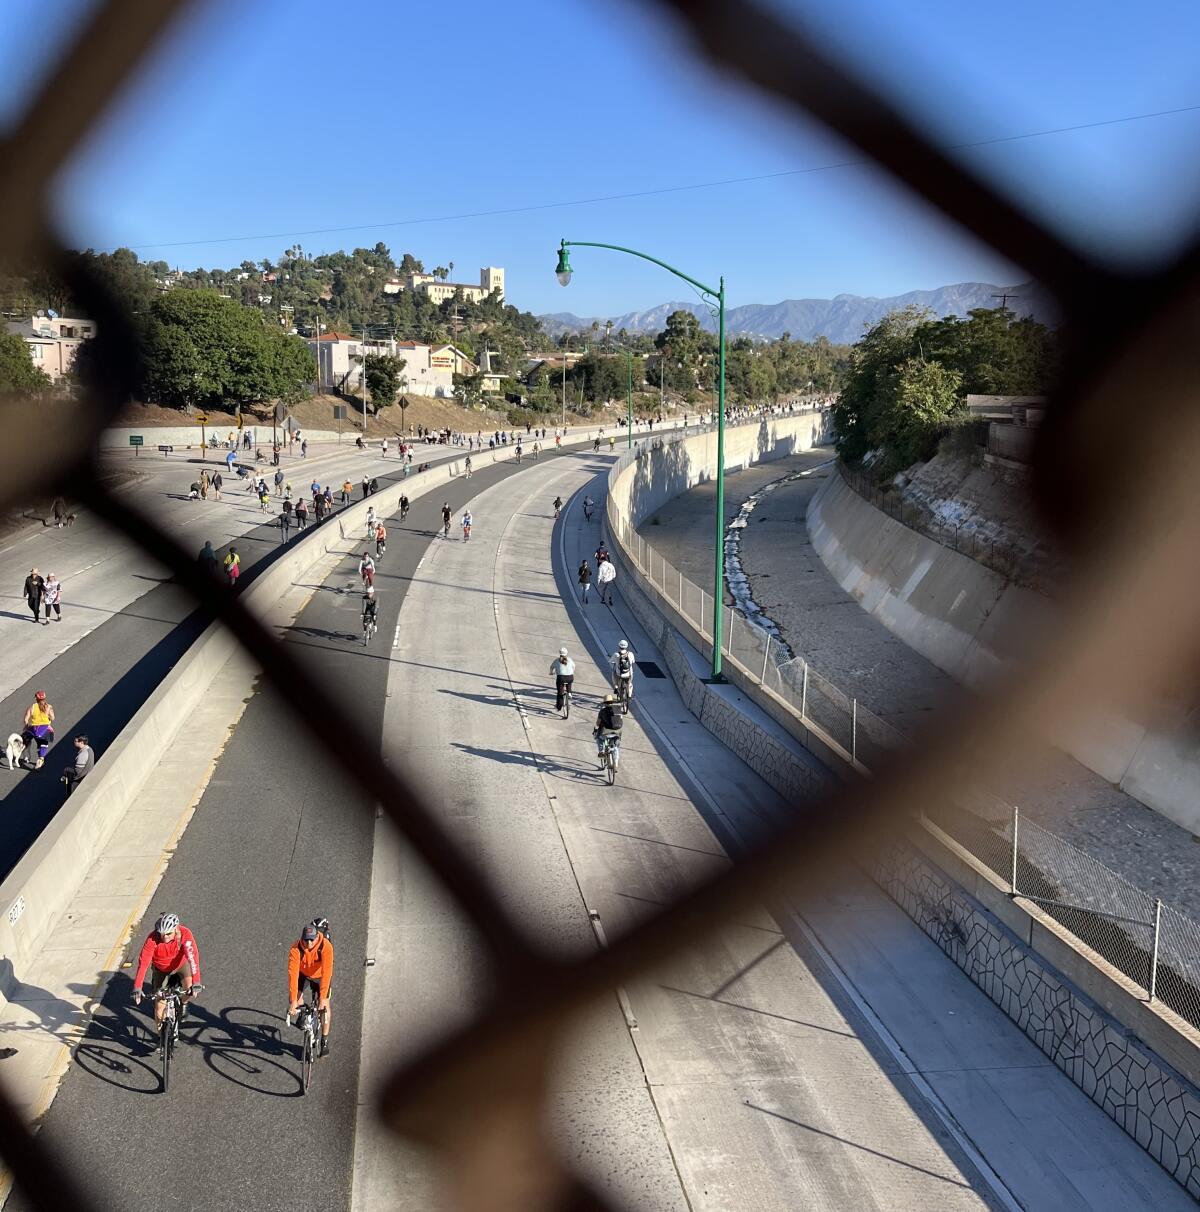 A view of the car-free 110 Freeway during ArroyoFest on Sunday.